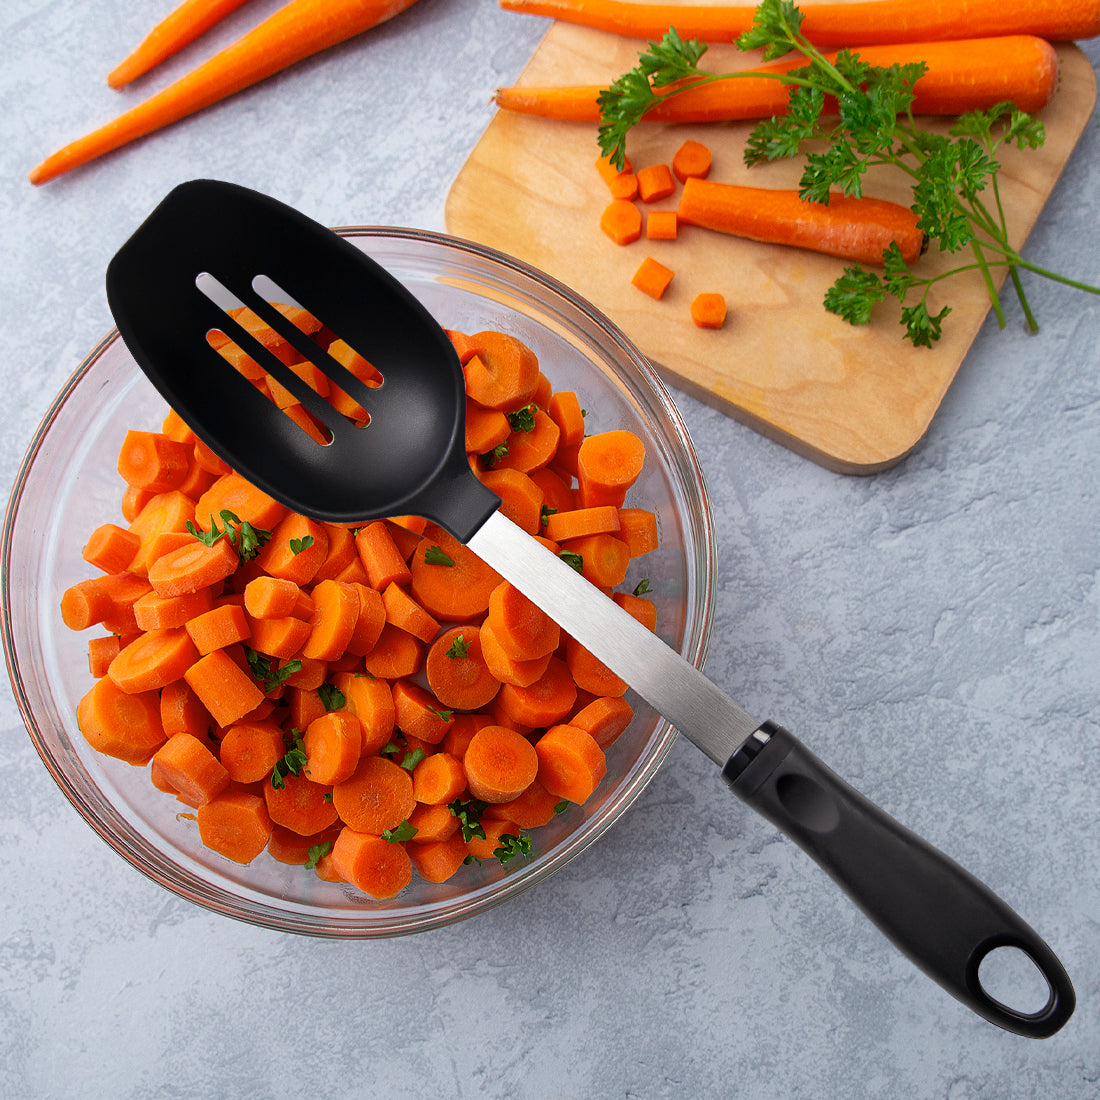 Rada Cutlery Slotted Spoon with leafy greens, peeled carrots, and cut carrots in a bowl.